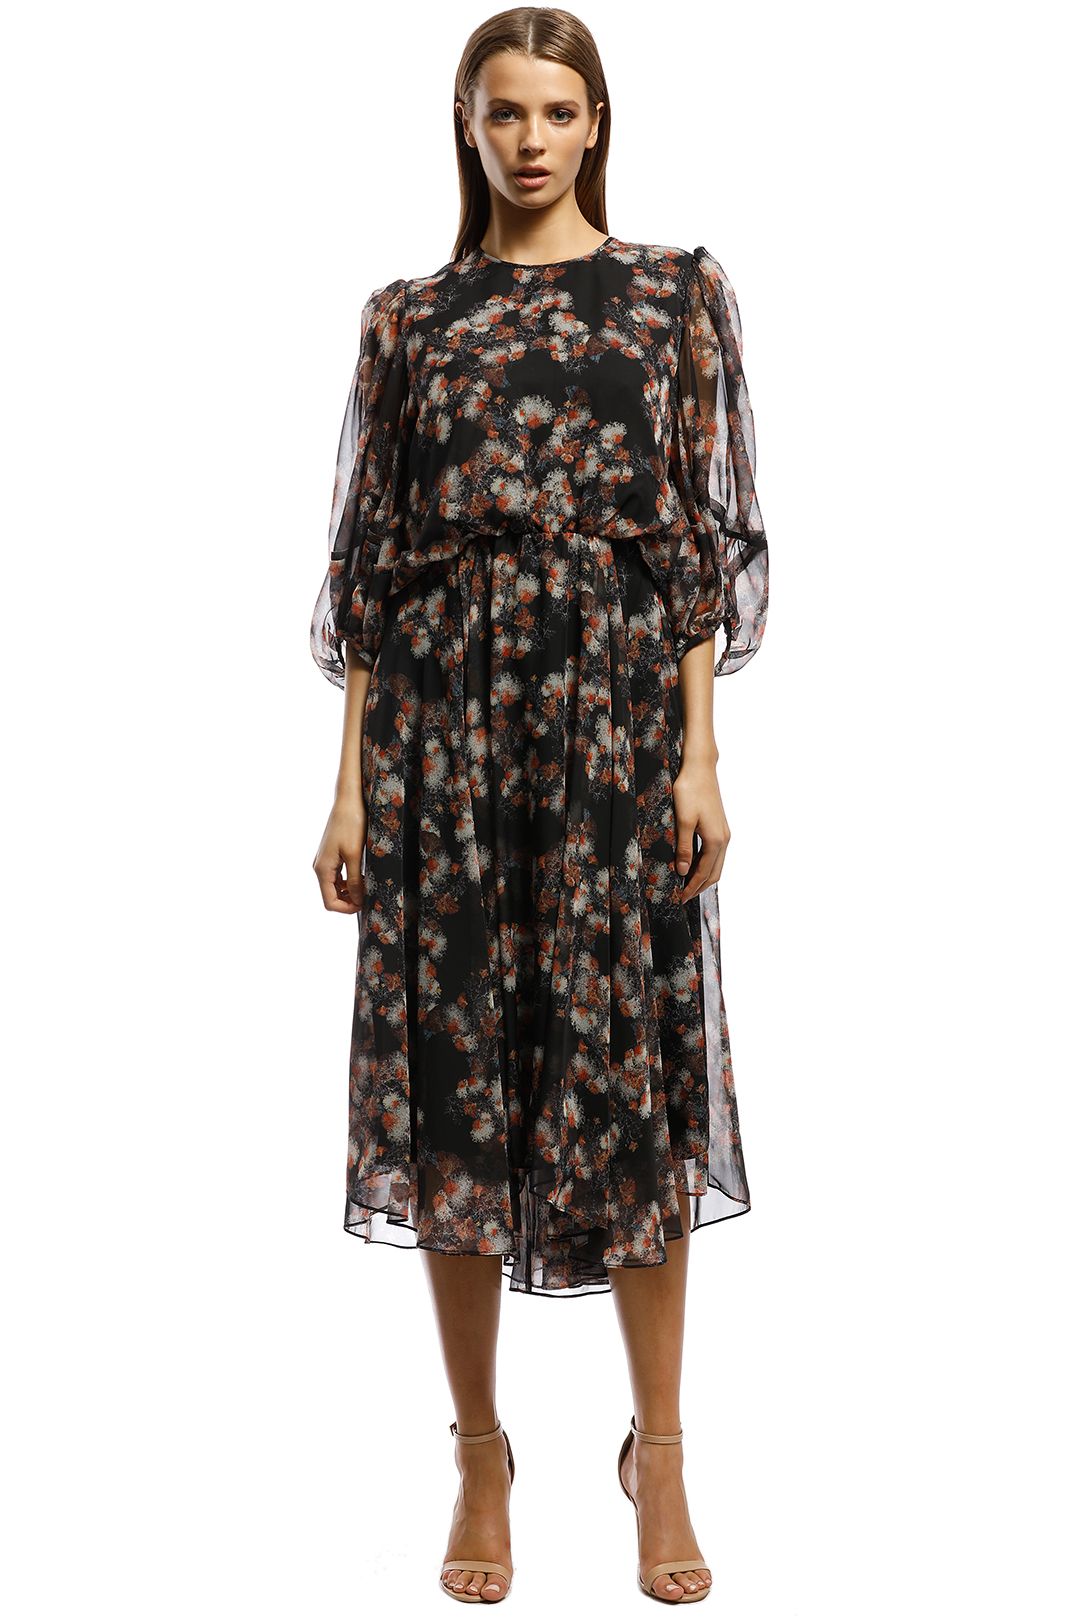 Camilla and Marc-Clio Crew Neck Dress-Black Floral-Front